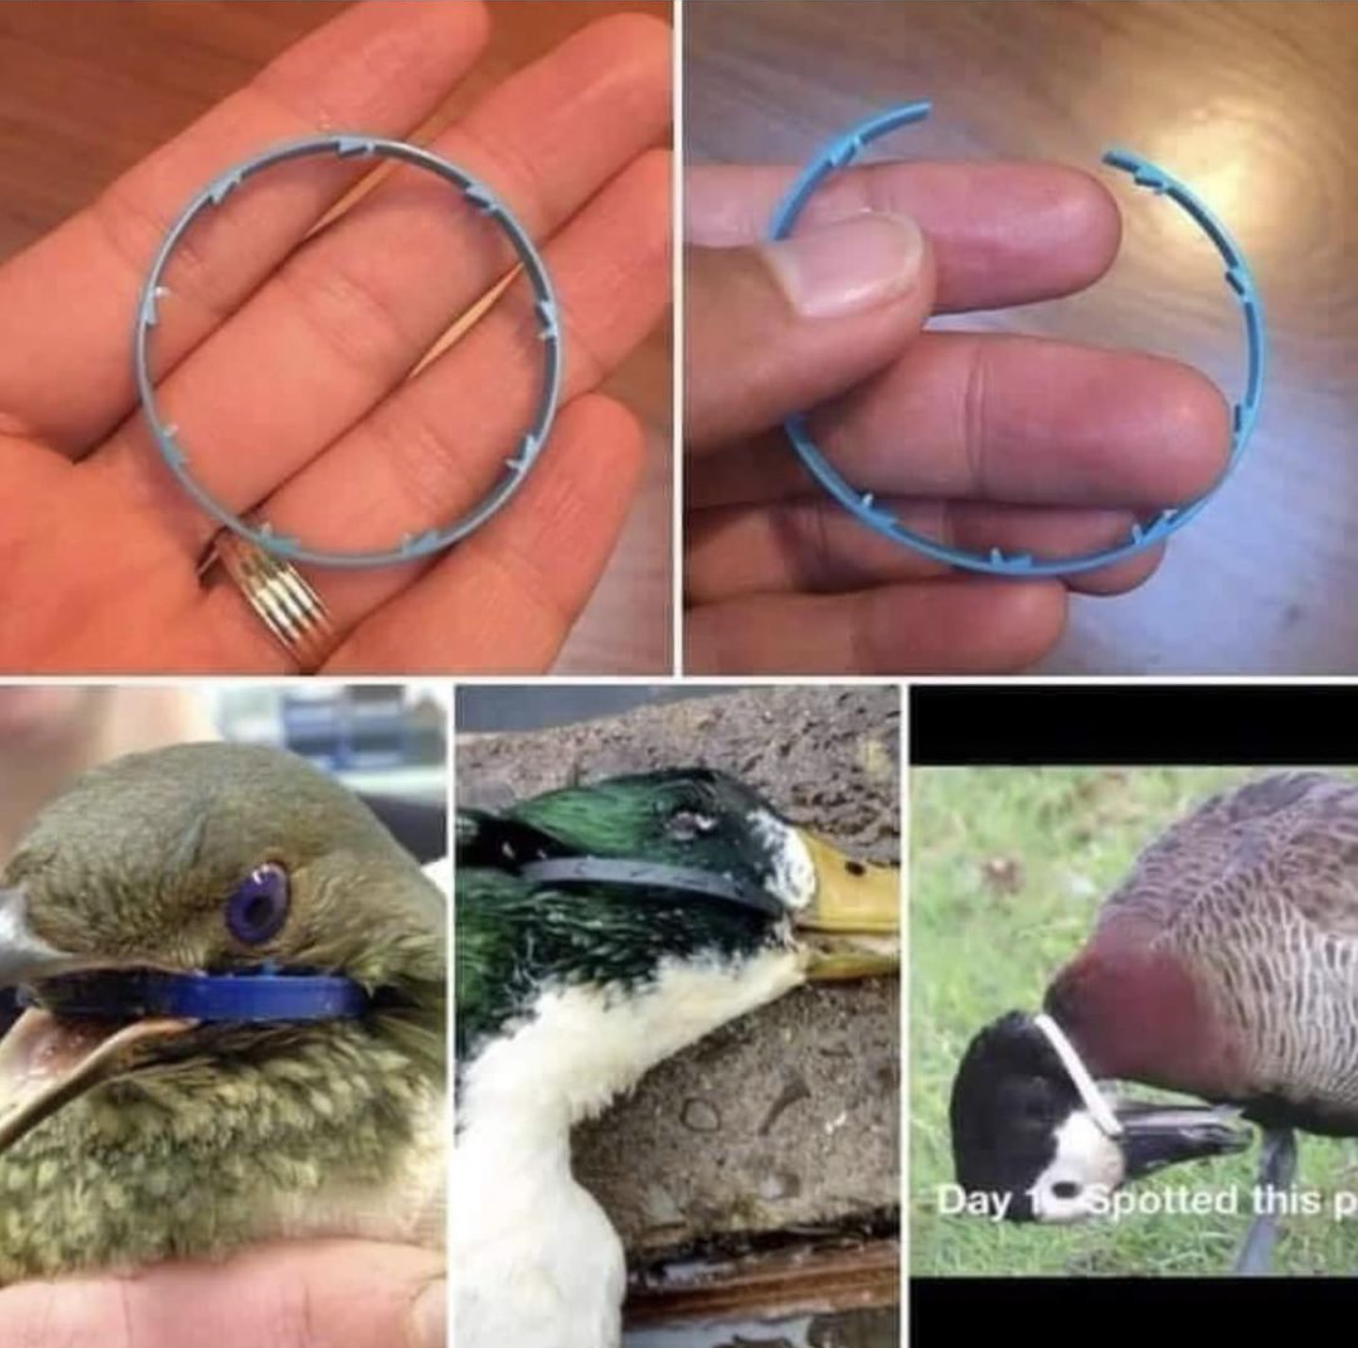 Please snip all plastic sealers/rings from milk and other bottles. It will only take a second and will hopefully save a life.